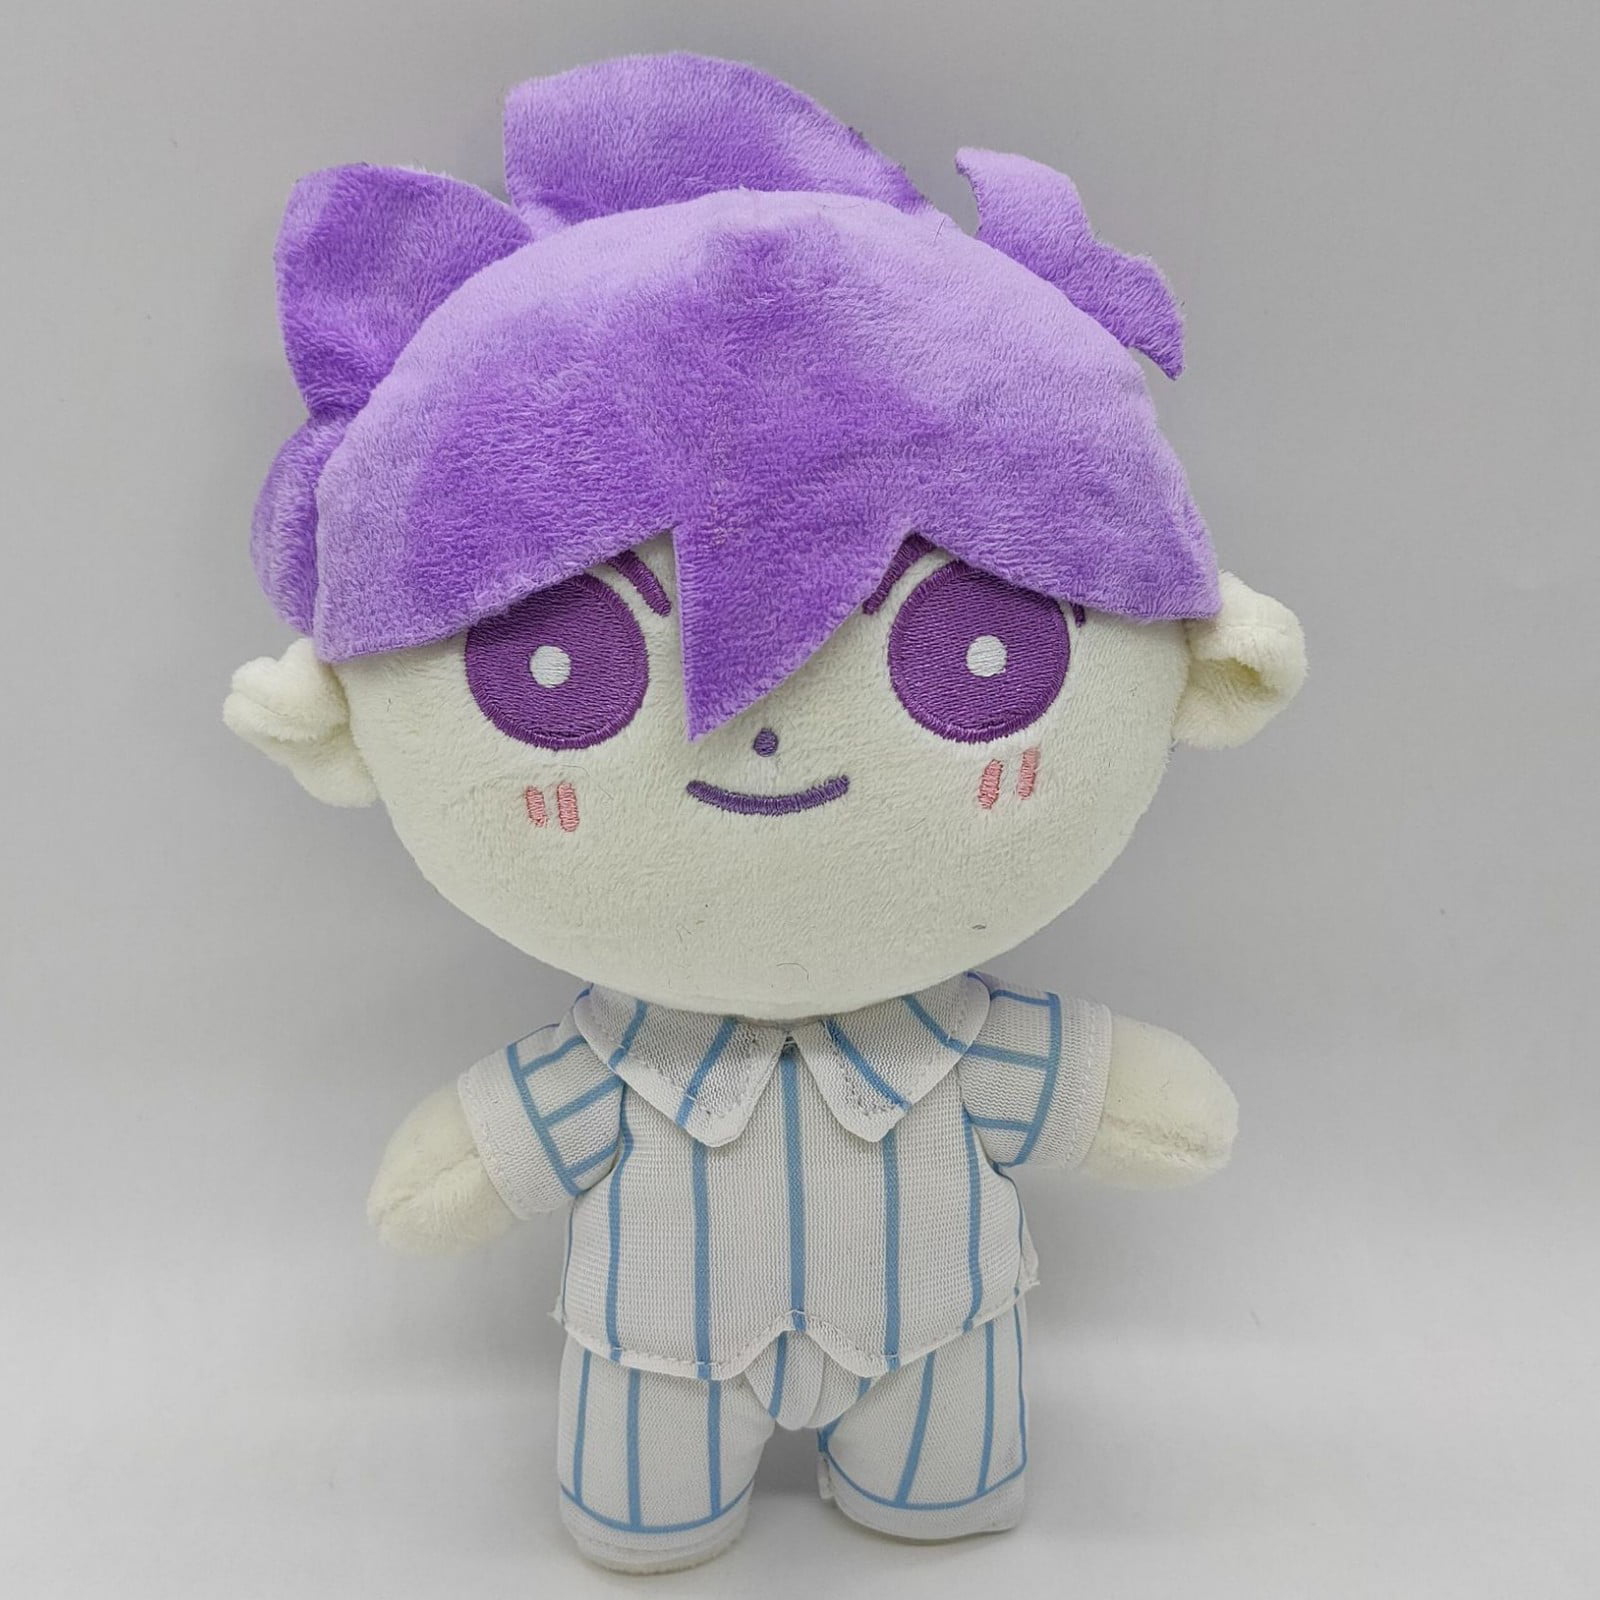 Omori Plush Toy Doll, 7.87 Inches Omori Kel Plushie Horror Game Anime  Characters Stuffed Pillow Plushies Figure Cartoon Toys for Kids Collection  Game